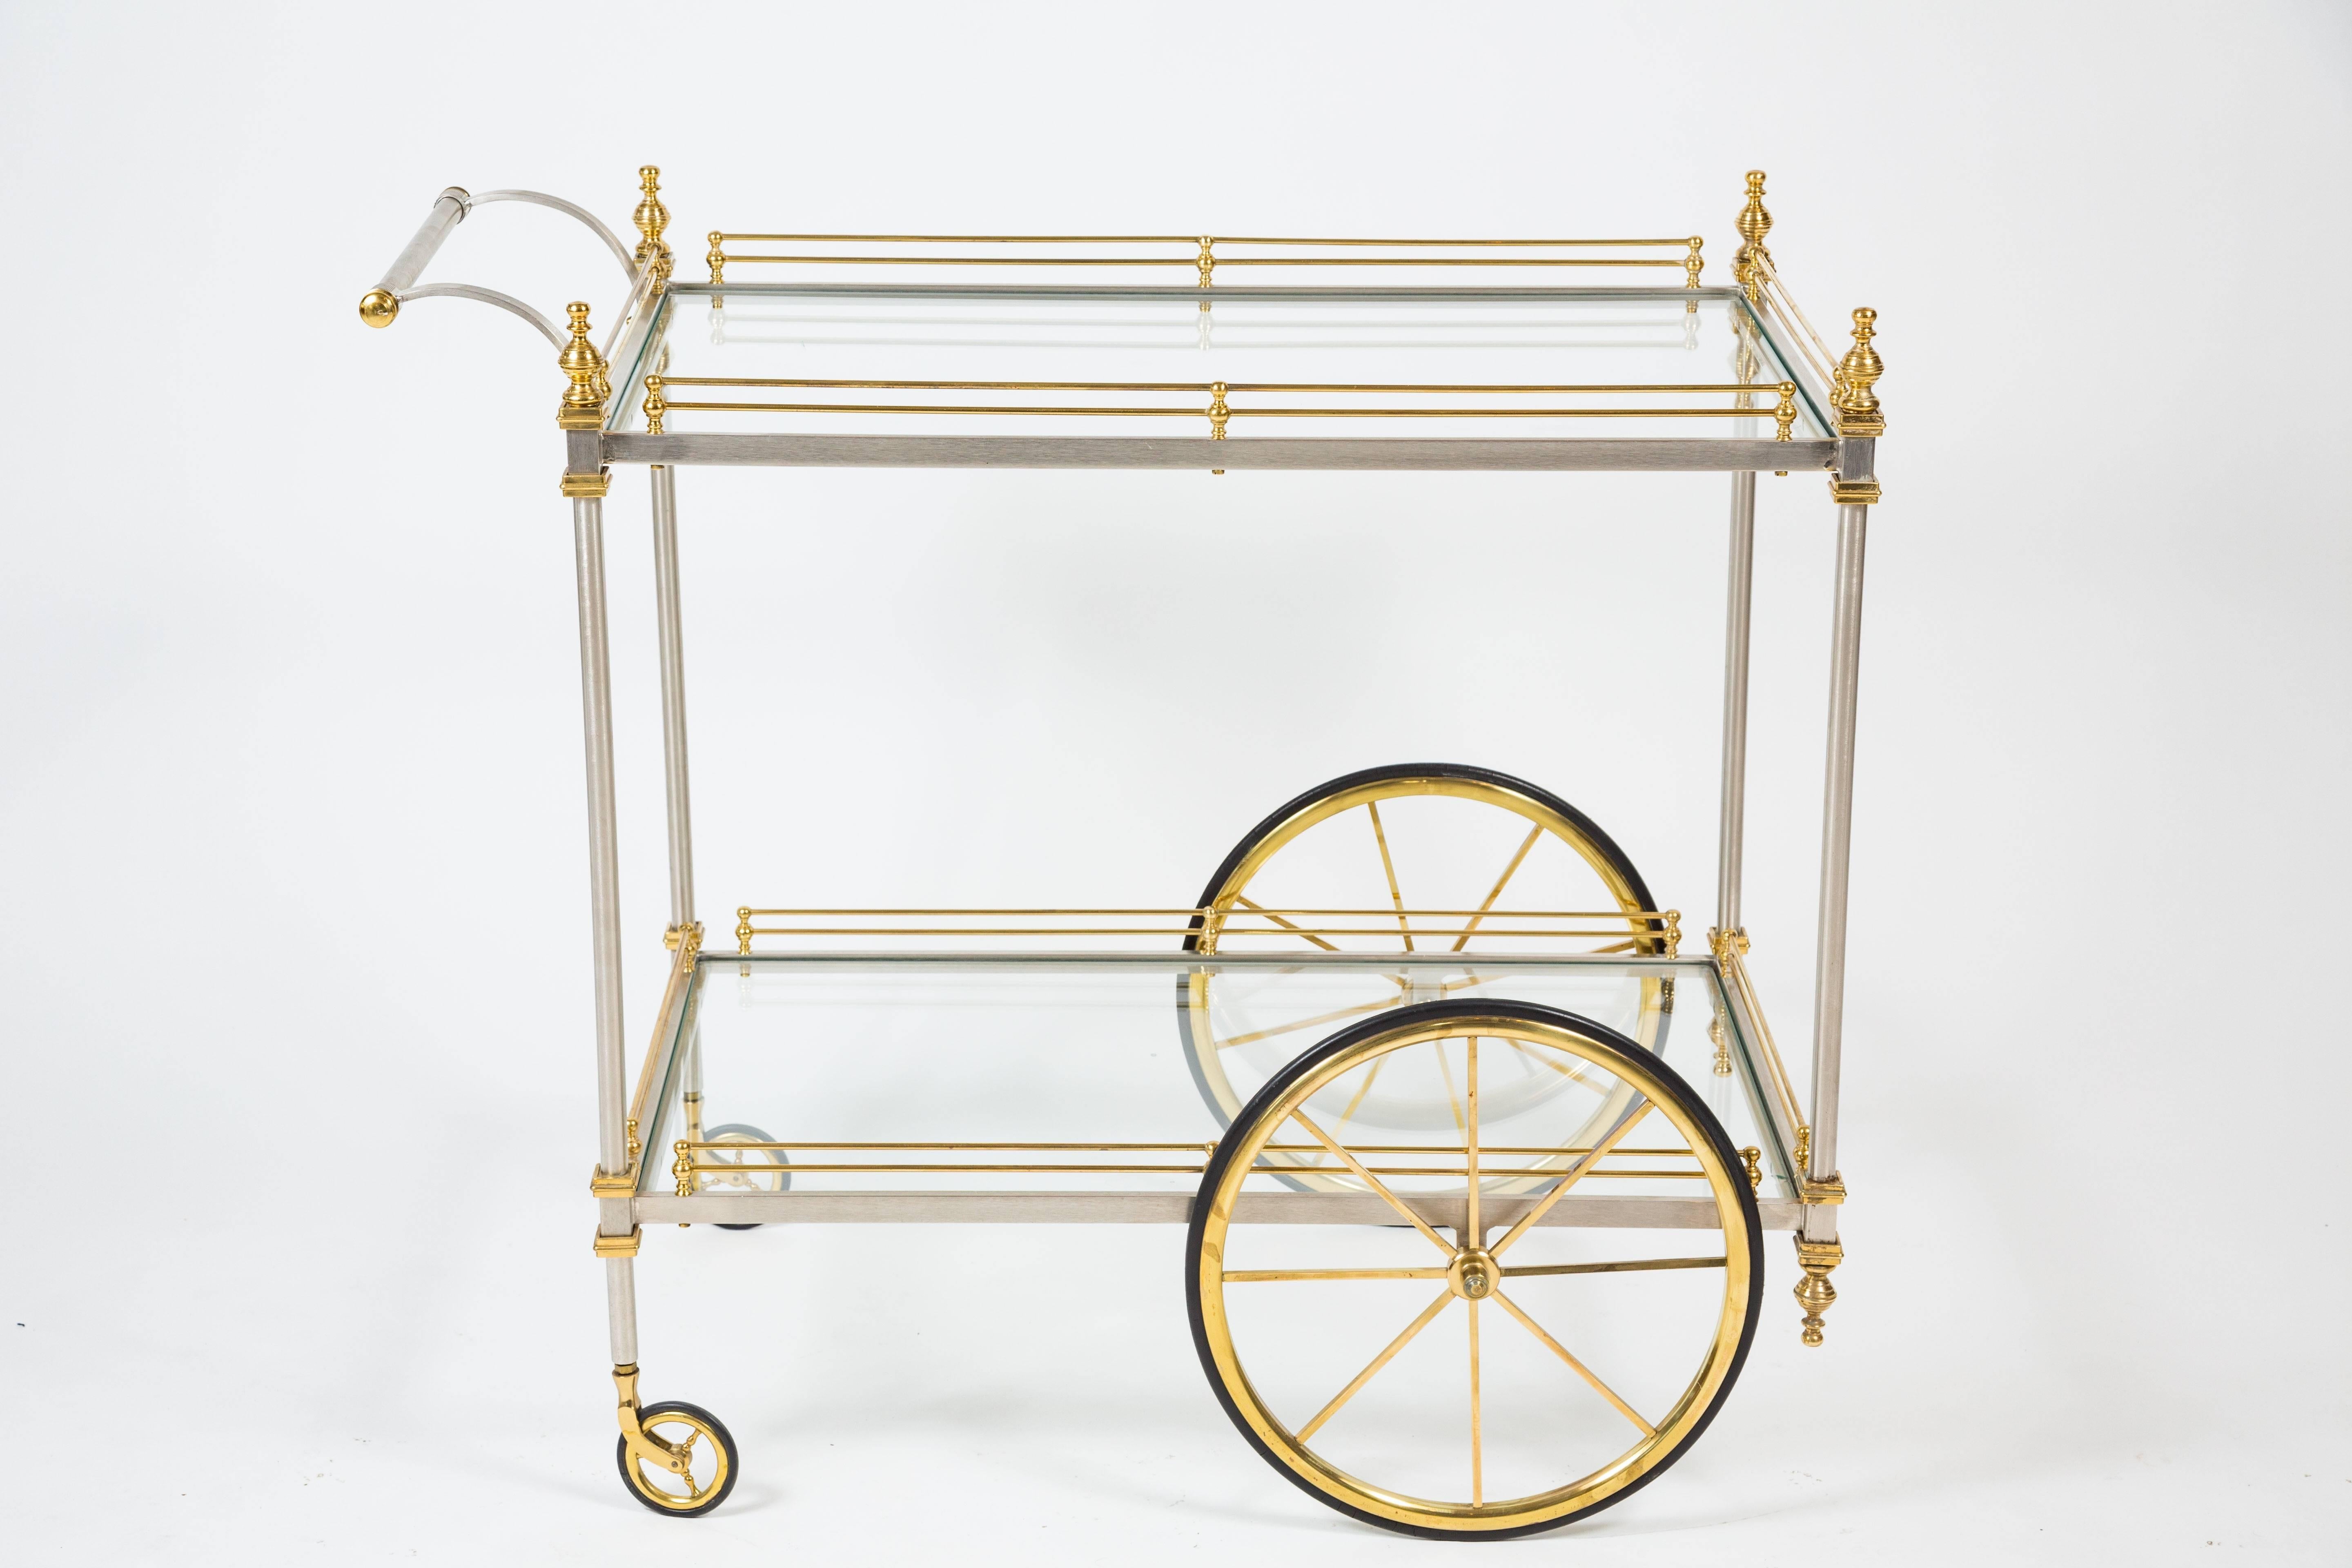 Polished Chic Metal and Brass Tiered Drinks Trolley